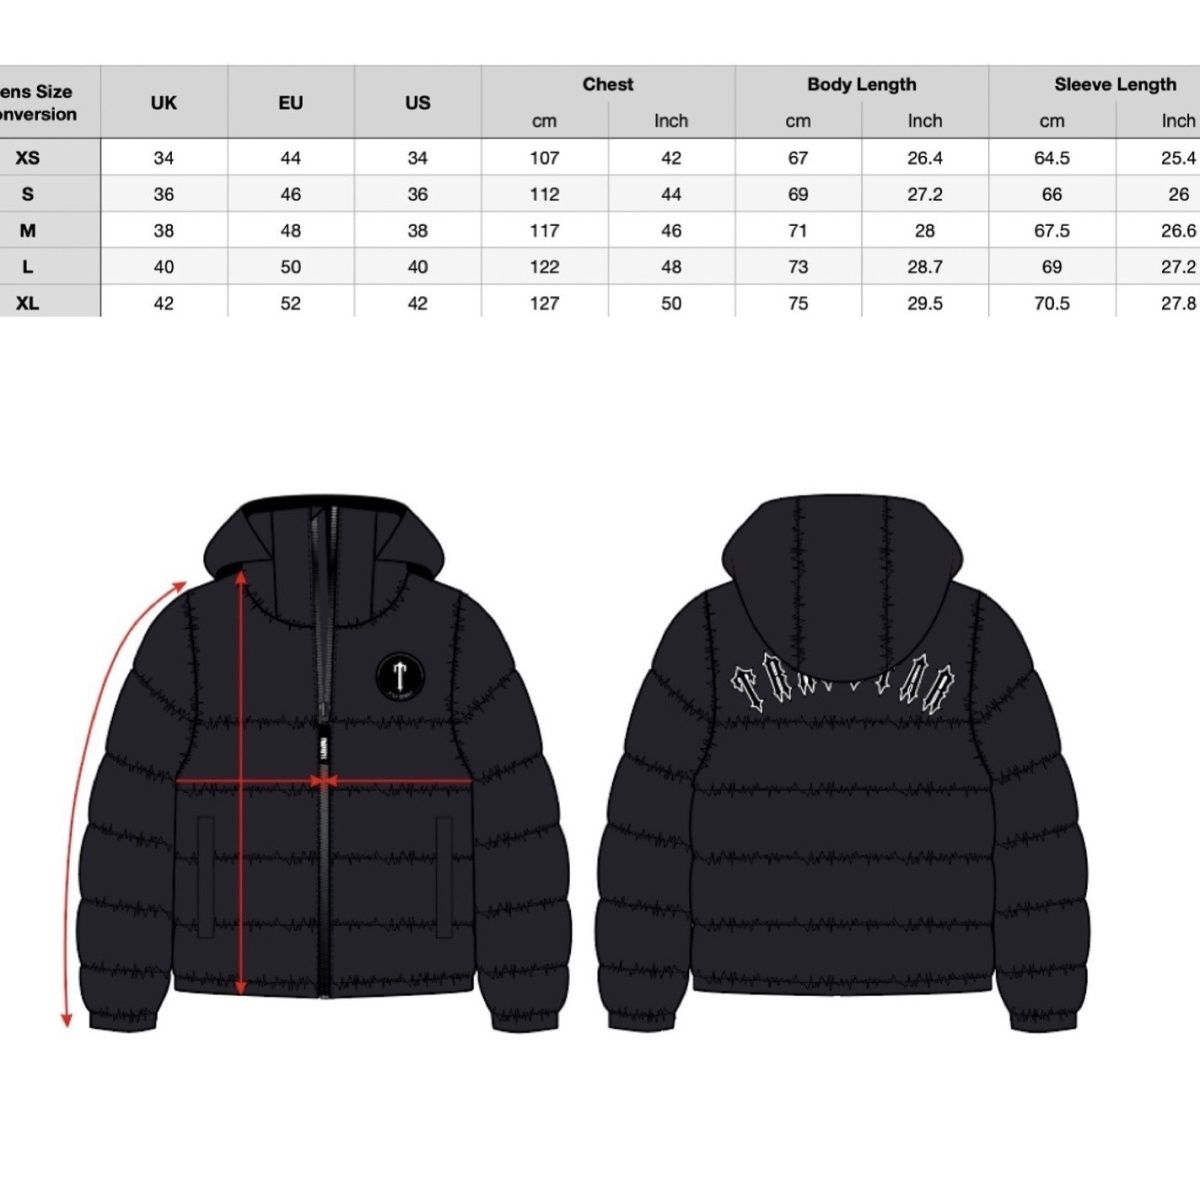 Trapstar for Mens Designer Down Parka Winter Puffer Jacket Giacca Trapstars Doudoune Homme Thick Warm Windproof Outdoorcoat with Removable Cap